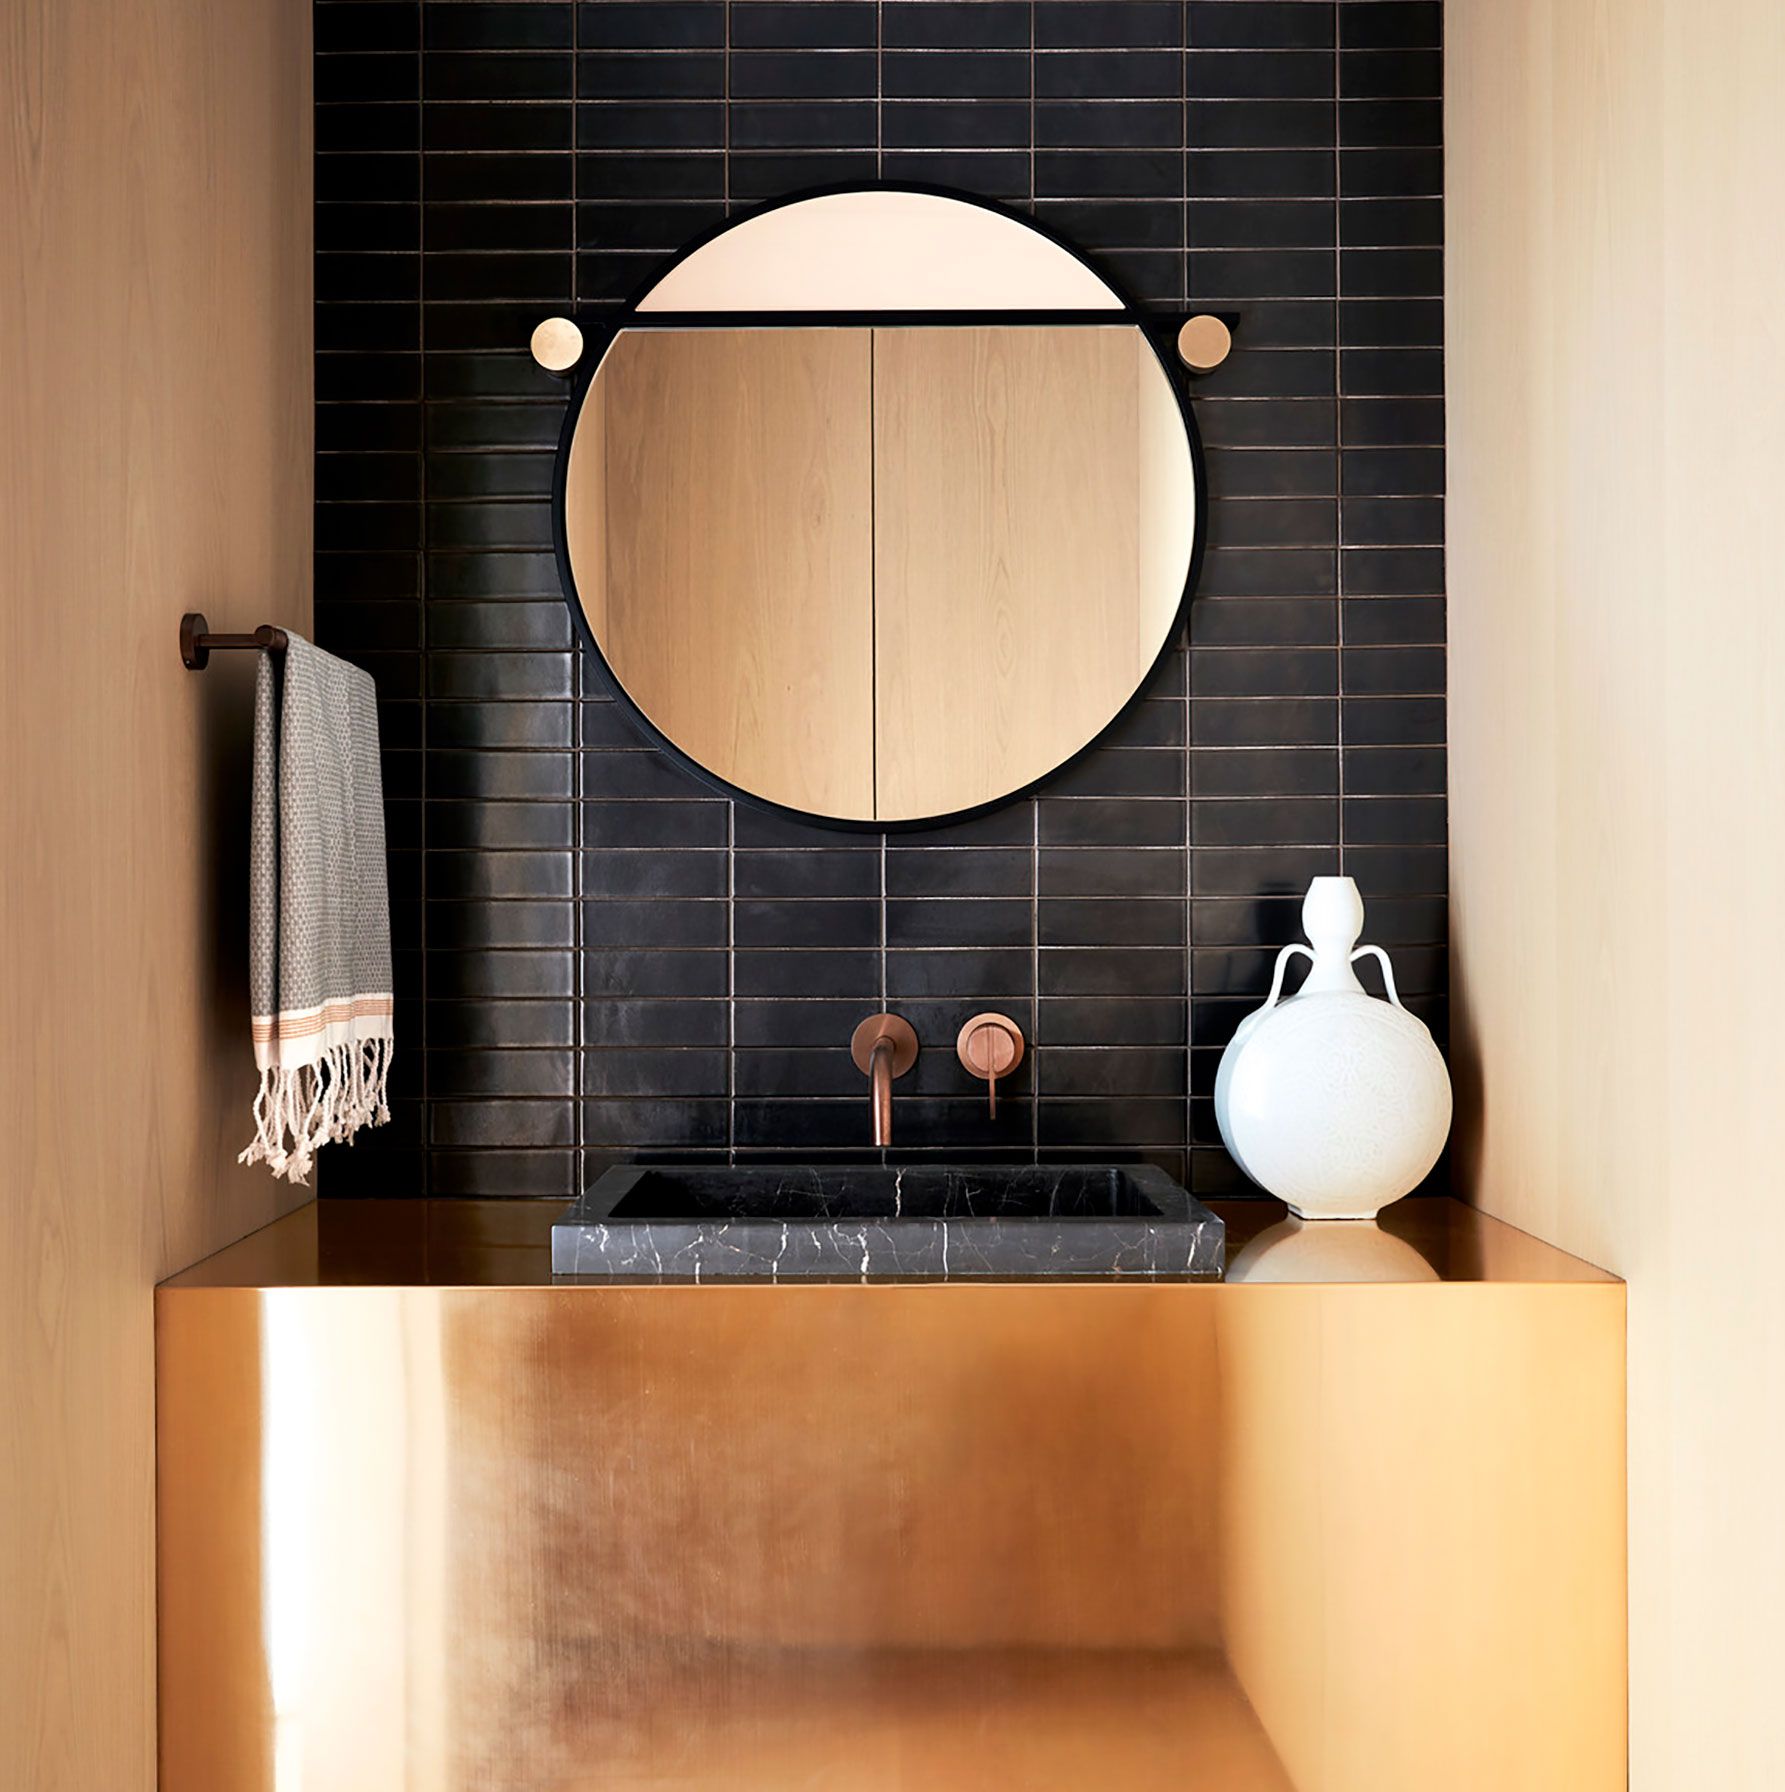 17 Powder Rooms That Delighted Us in 2021